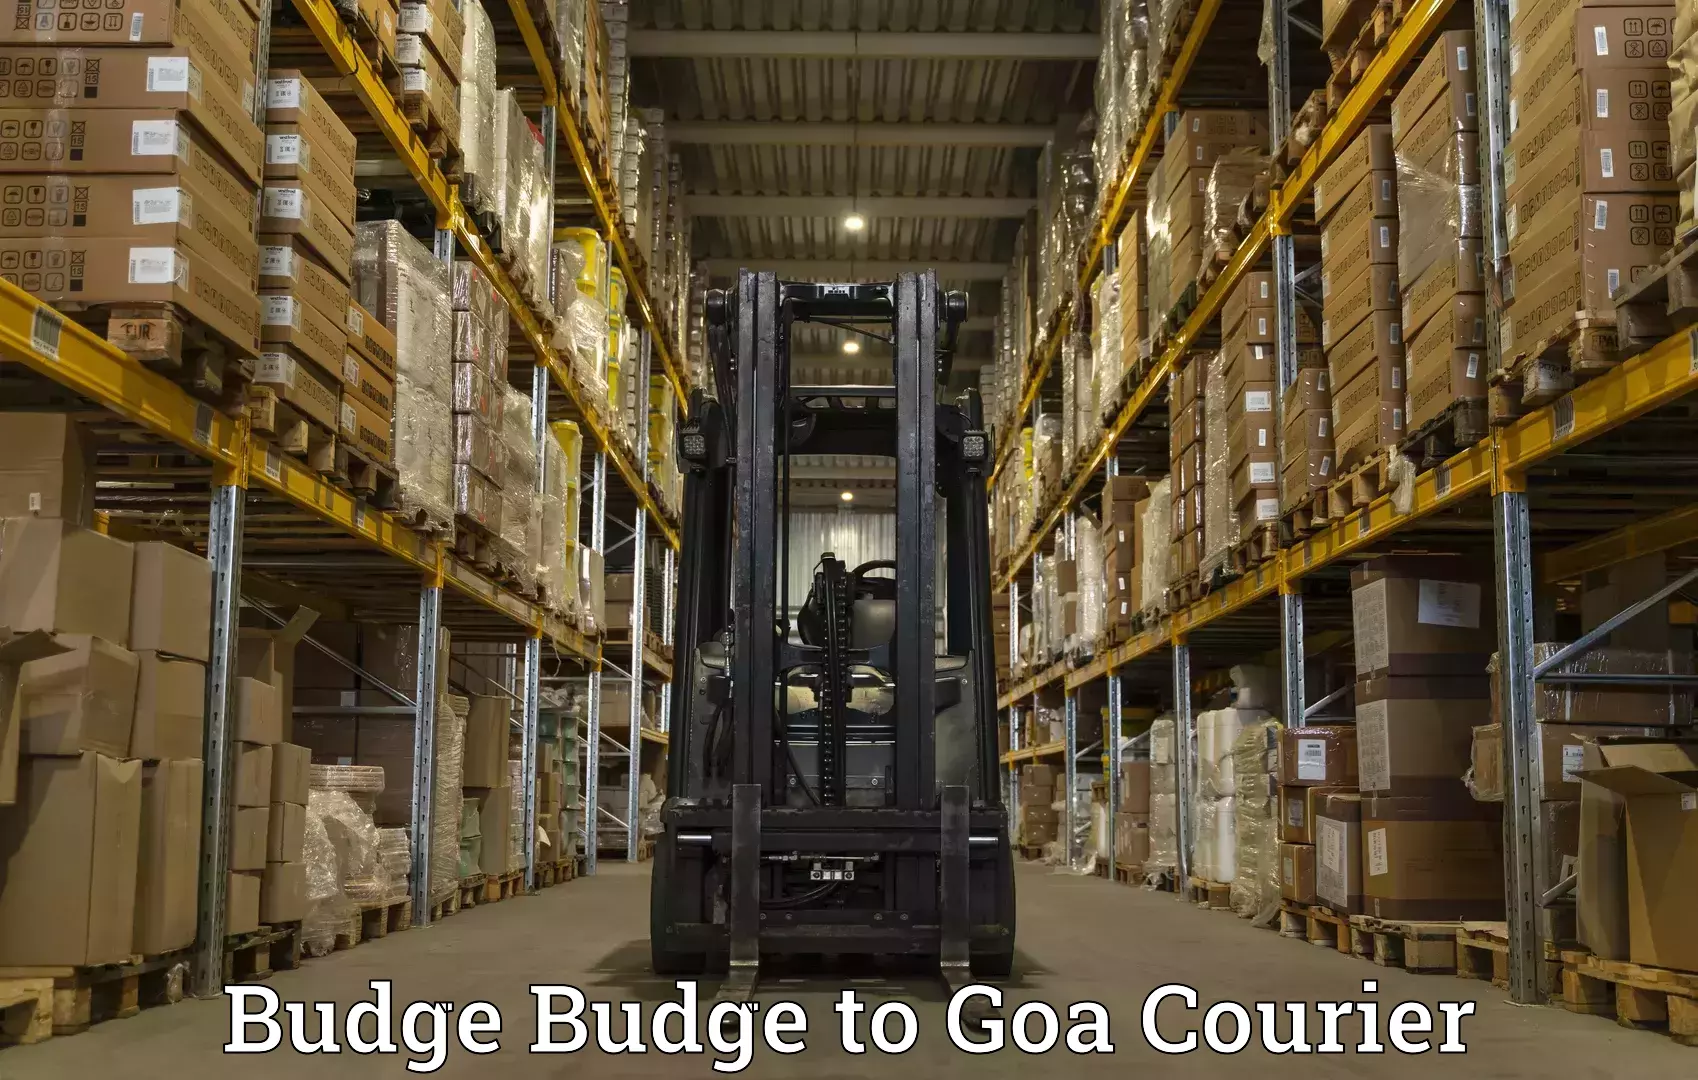 Multi-national courier services Budge Budge to Goa